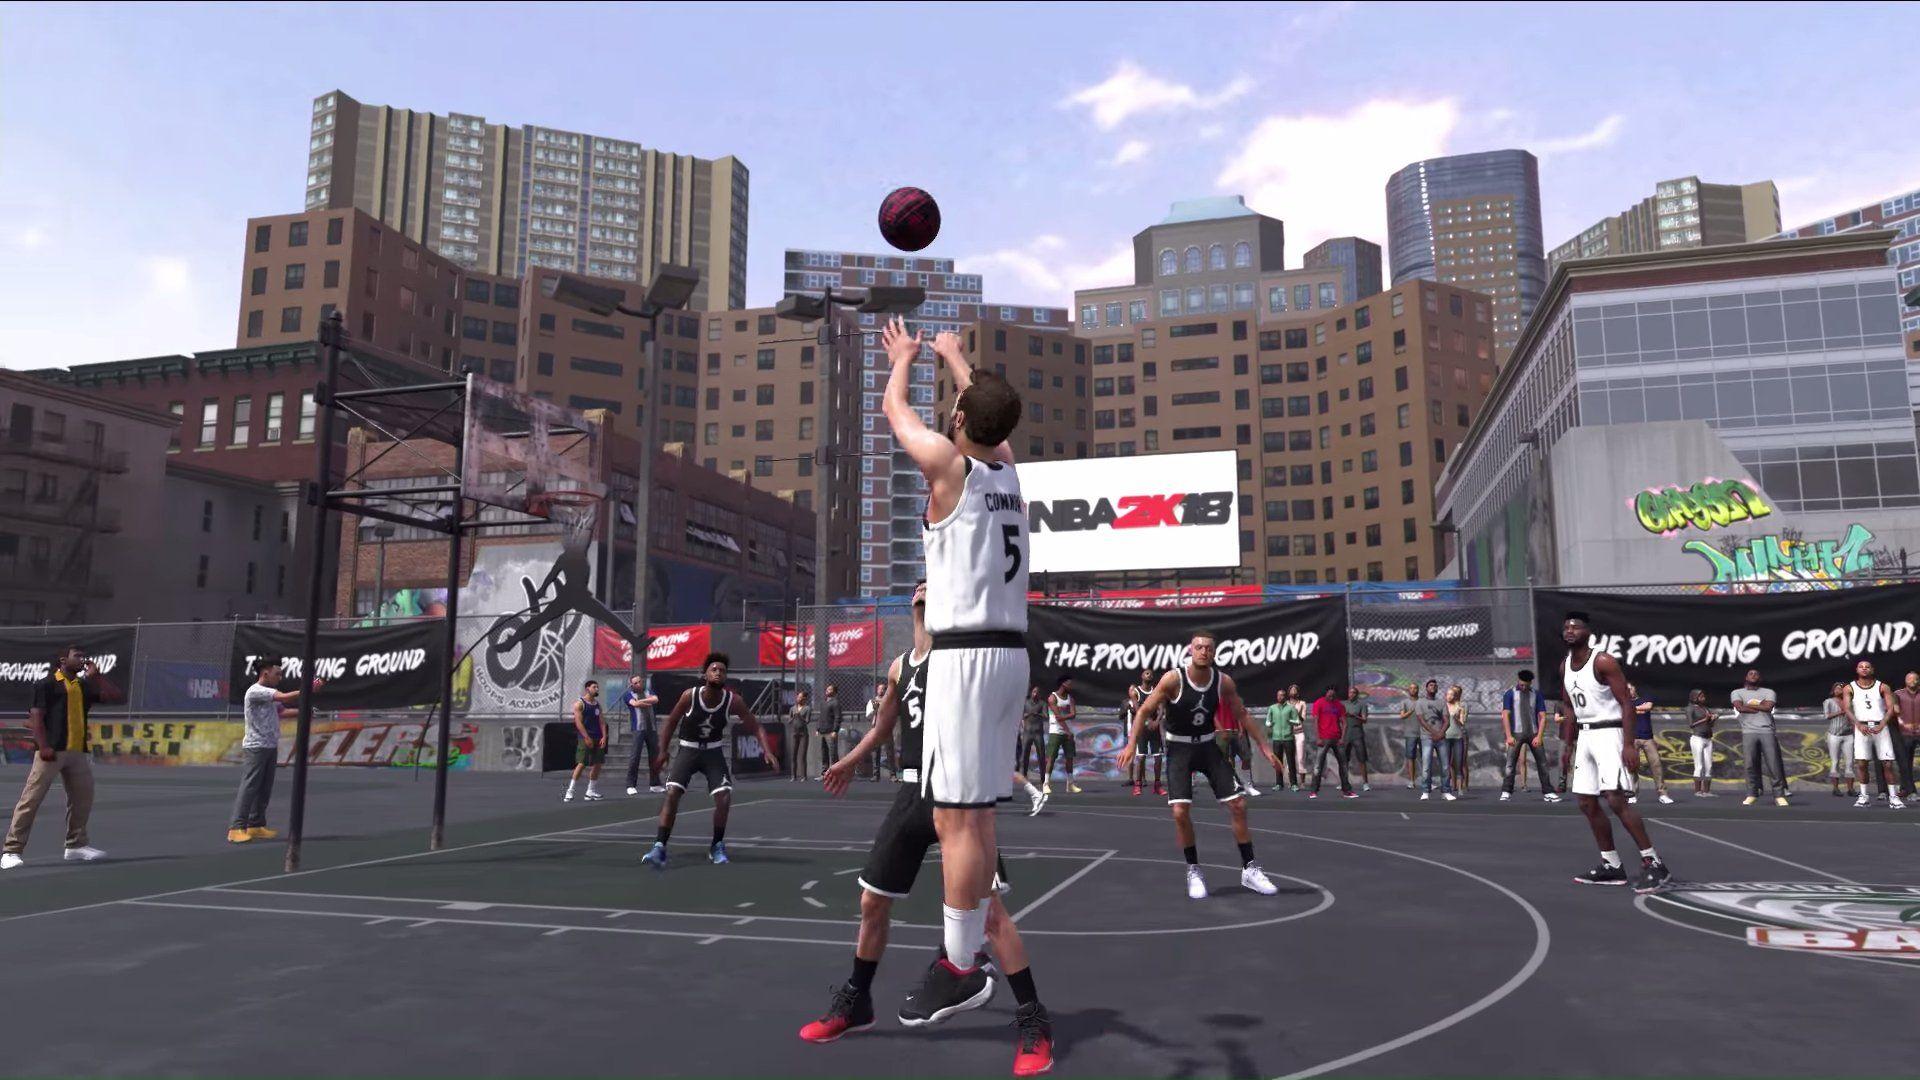 New 2K18 Heralds the Demo of The Prelude